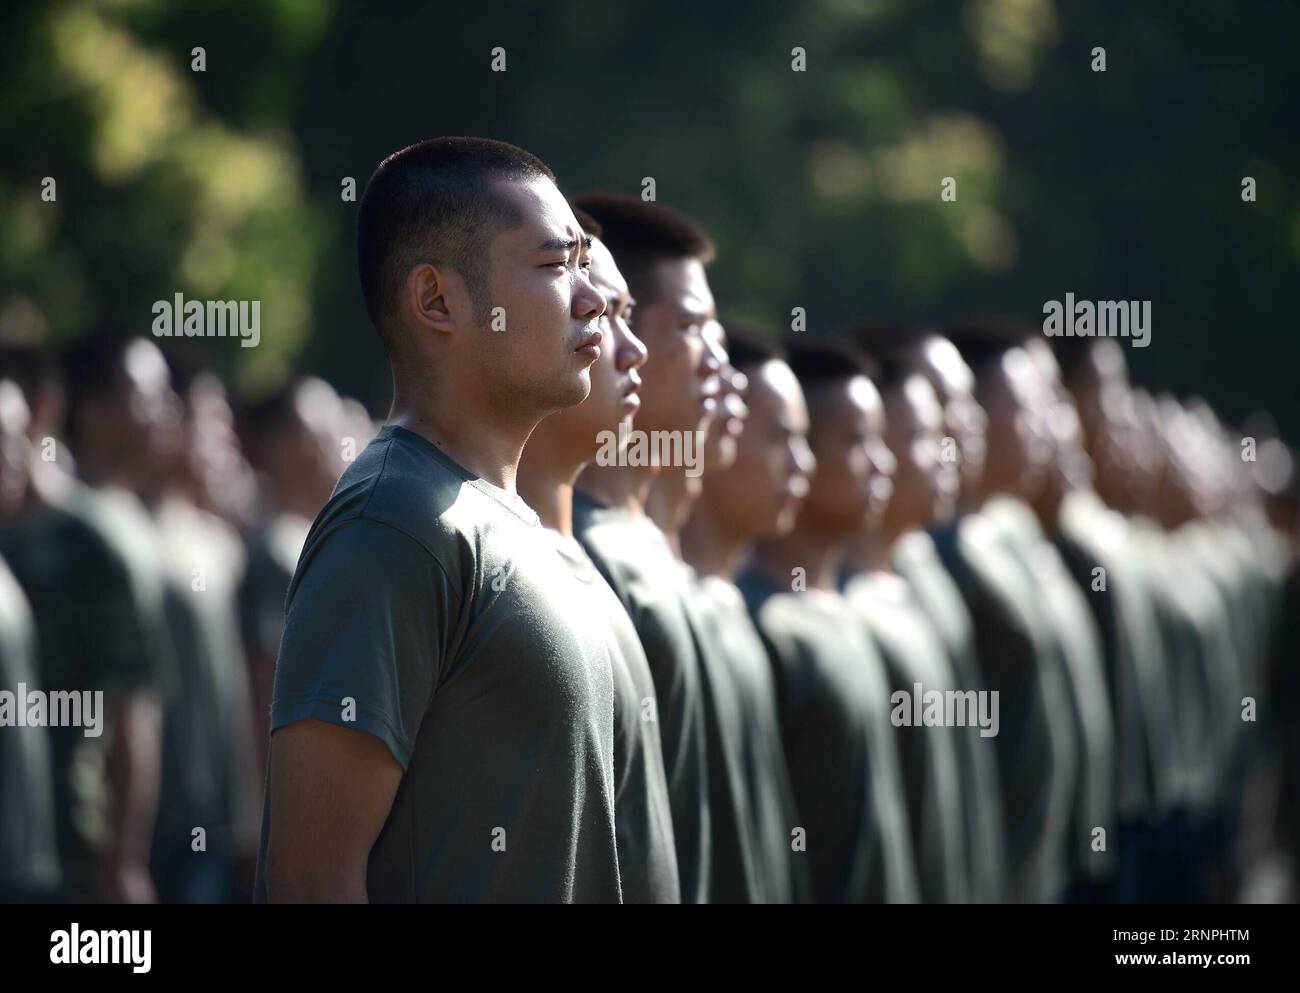 (170830) -- LIUZHOU, Aug. 30, 2017 -- Deng Feng (front) takes part in a training for joining the army in Liuzhou, south China s Guangxi Zhuang Autonomous Region, Aug. 30, 2017. Deng, 24, who just graduated from Xingjian College of Science and Liberal Arts of Guangxi University, has signed for the army twice. When he was a freshman, Deng Feng was for the first time recruited as a soldier of Guangxi Frontier Corps of Chinese Armed Police and was on service for two years. Deng Feng then left army and went back to Guangxi University until he finished his study. Upon graduation, however, Deng Feng Stock Photo